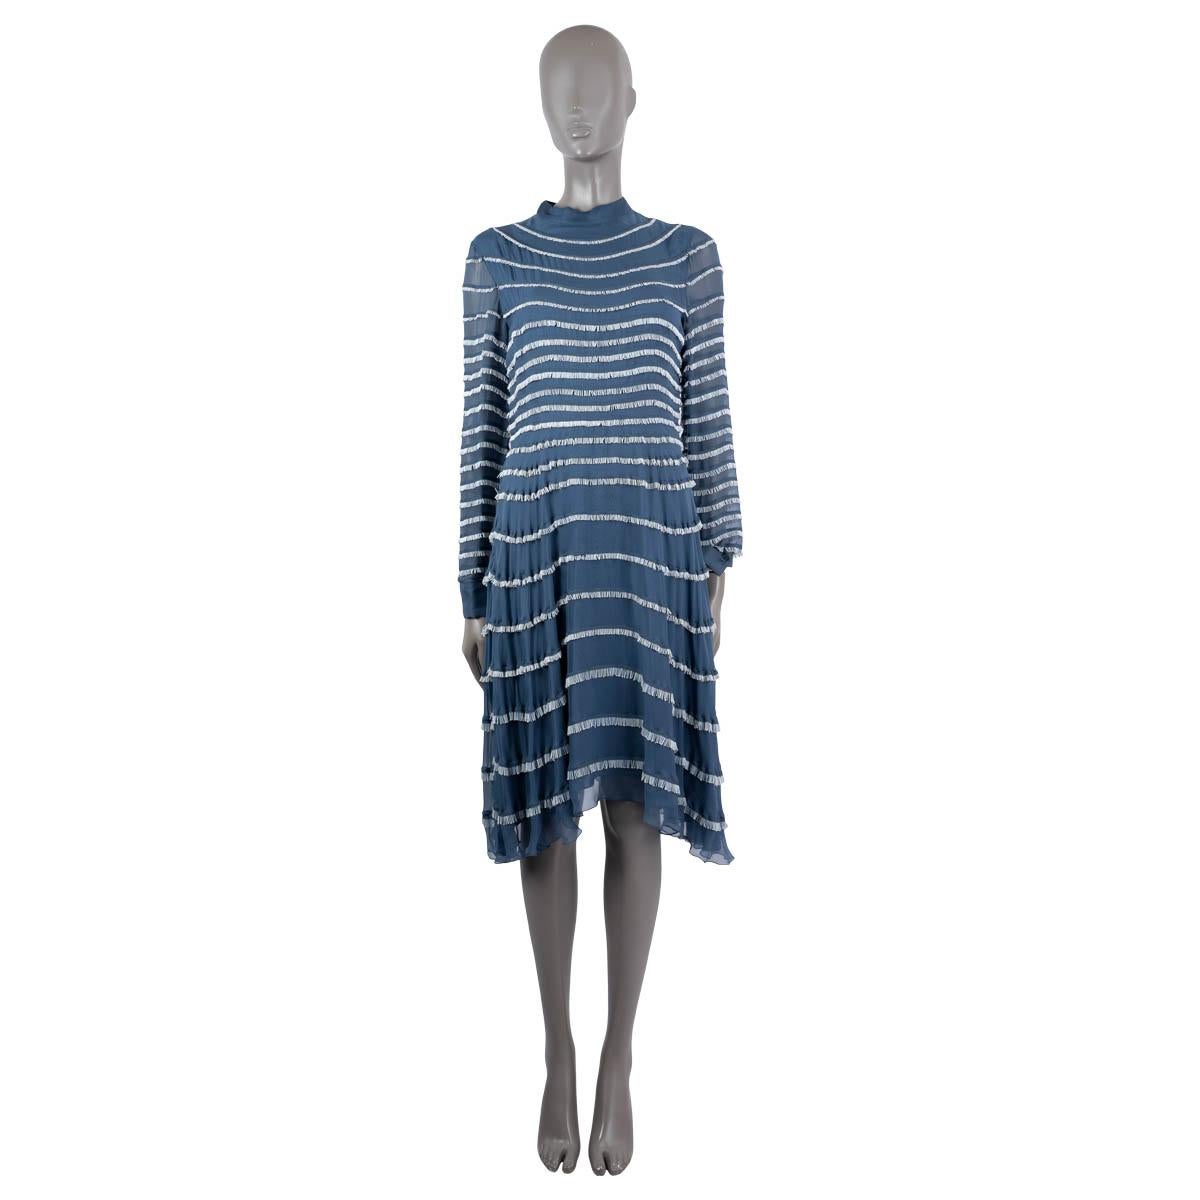 100% authentic Valentino bugle-beaded tie-neck dress in blue and white chiffon (100%). Size tag is missing. Lined in blue silk (100%). Has been worn and is in excellent condition. 

Measurements
Tag Size	Missing
Size	S
Shoulder Width	44cm